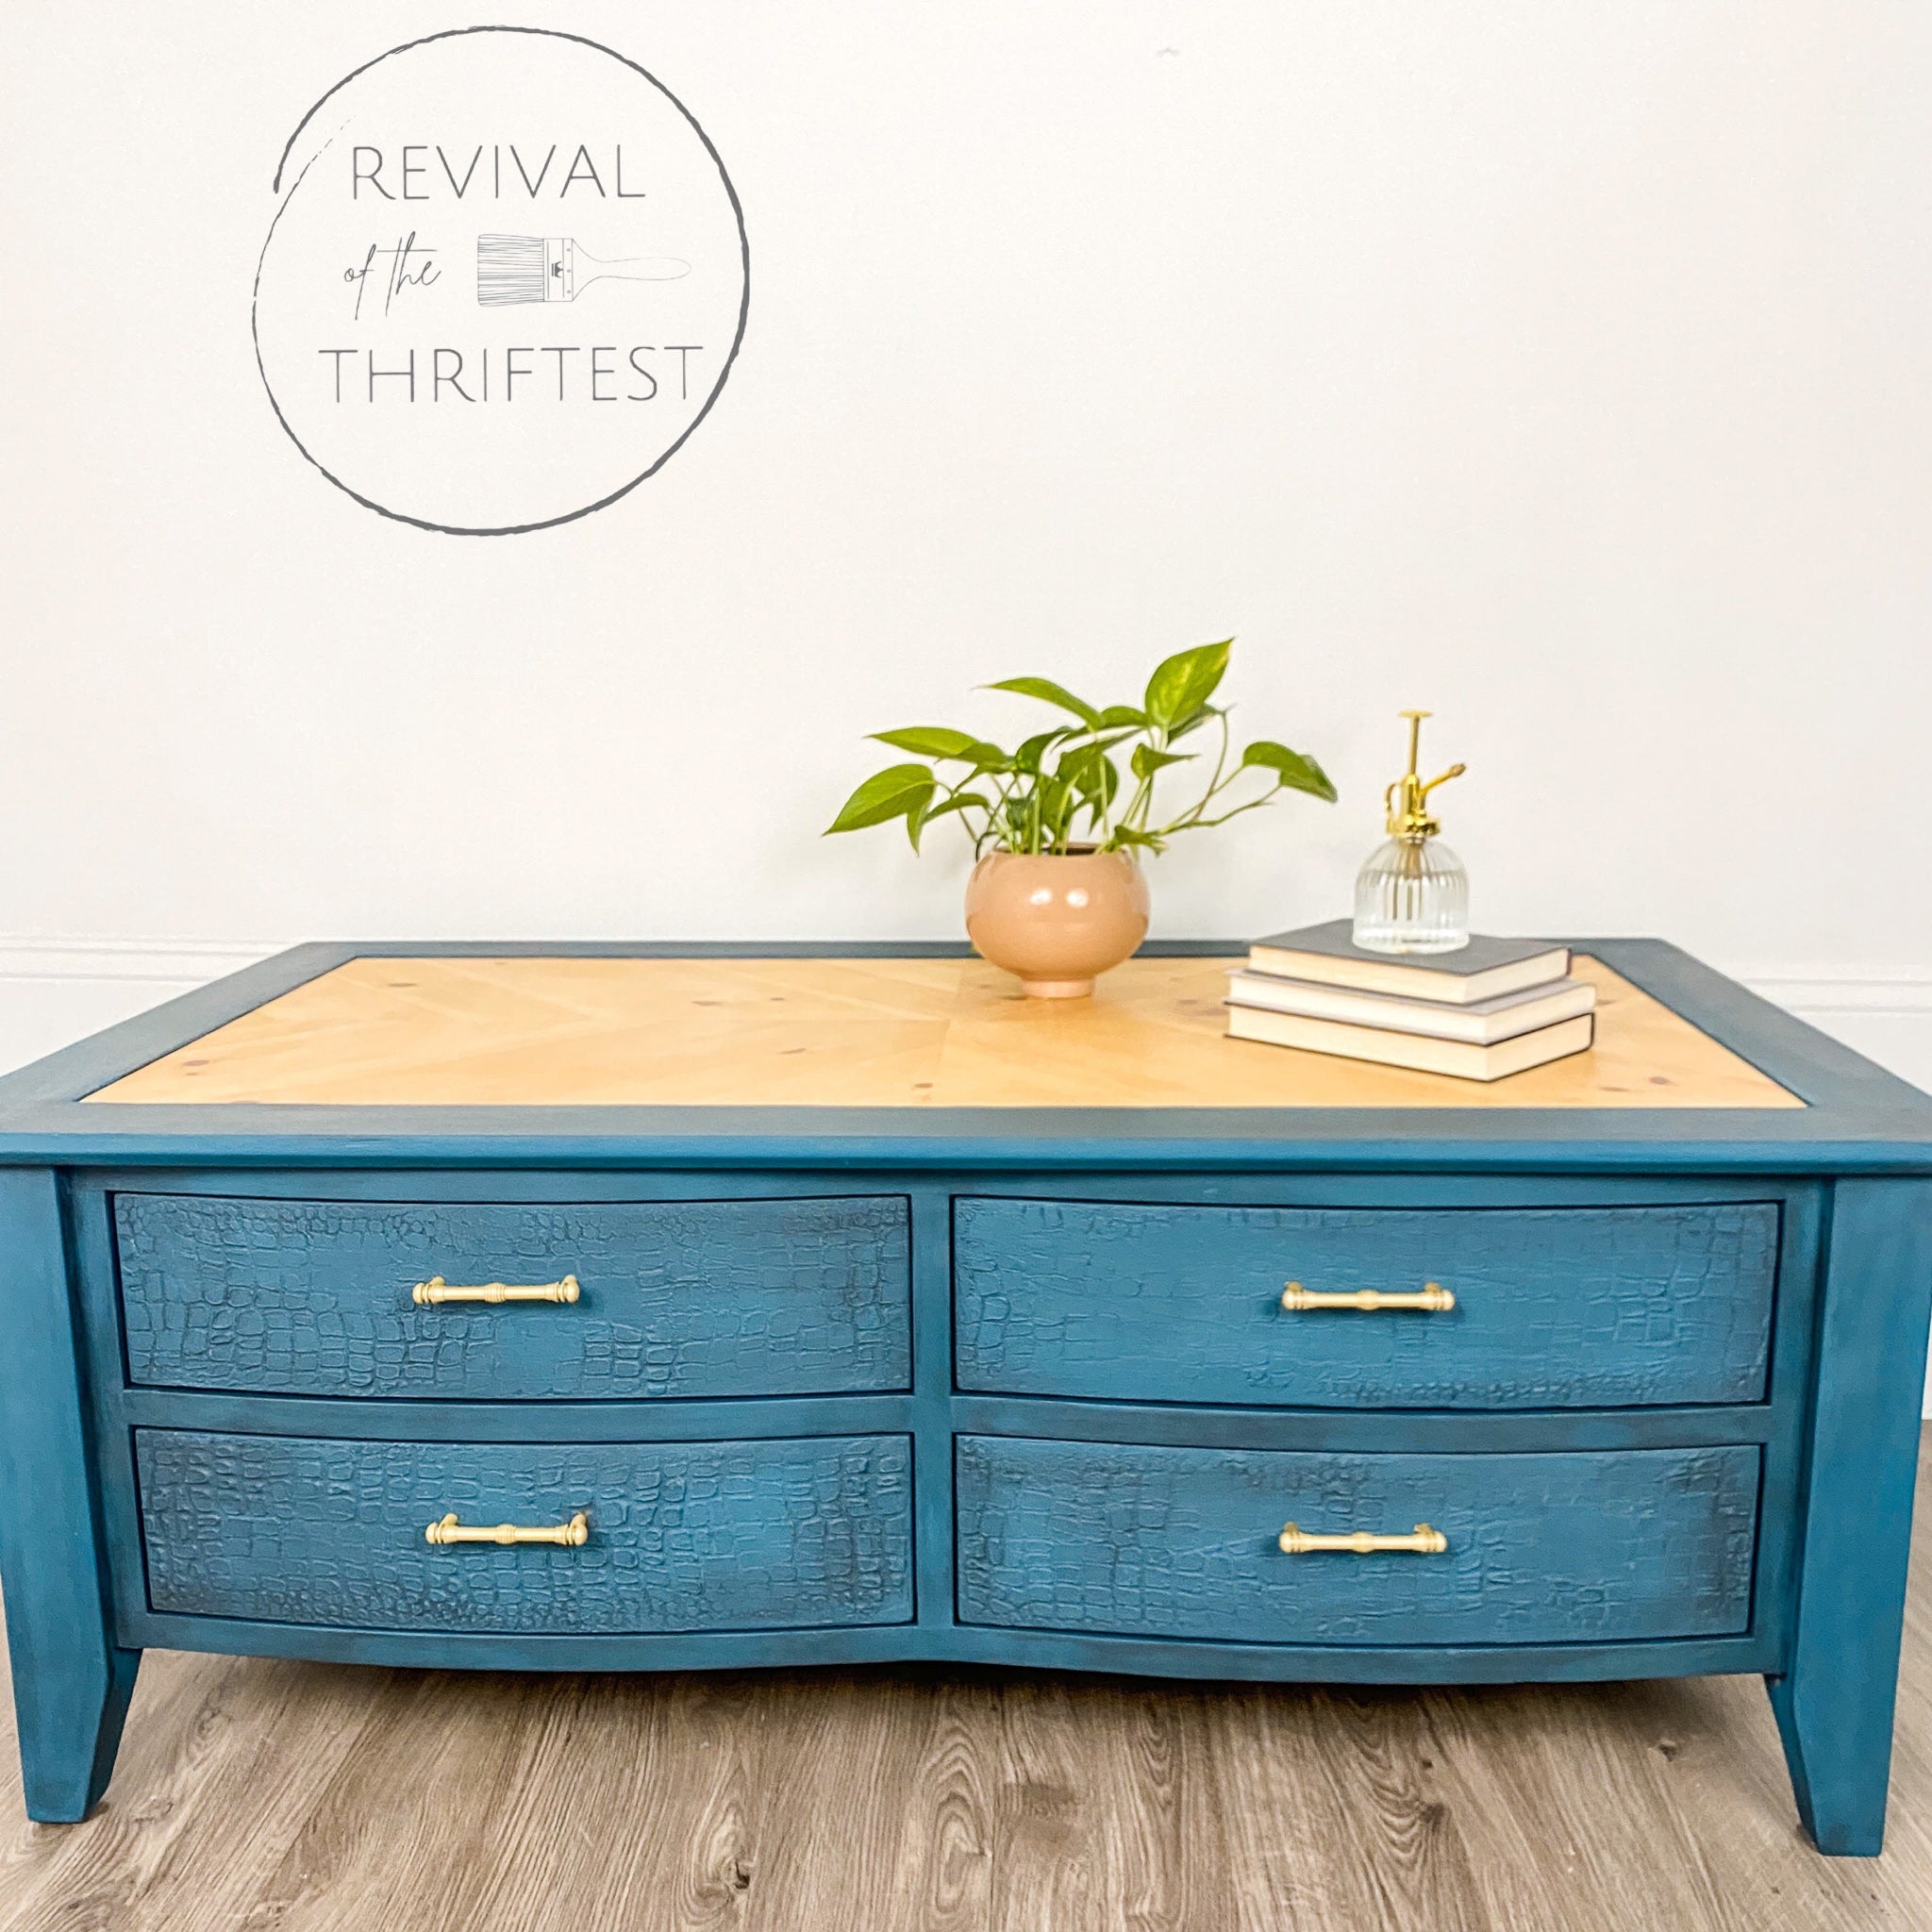 A coffee table with drawers refurbished by Revival of the Thriftest is painted with Dixie Belle's Antebellum Blue chalk mineral paint and has a natural wood table top inlay.